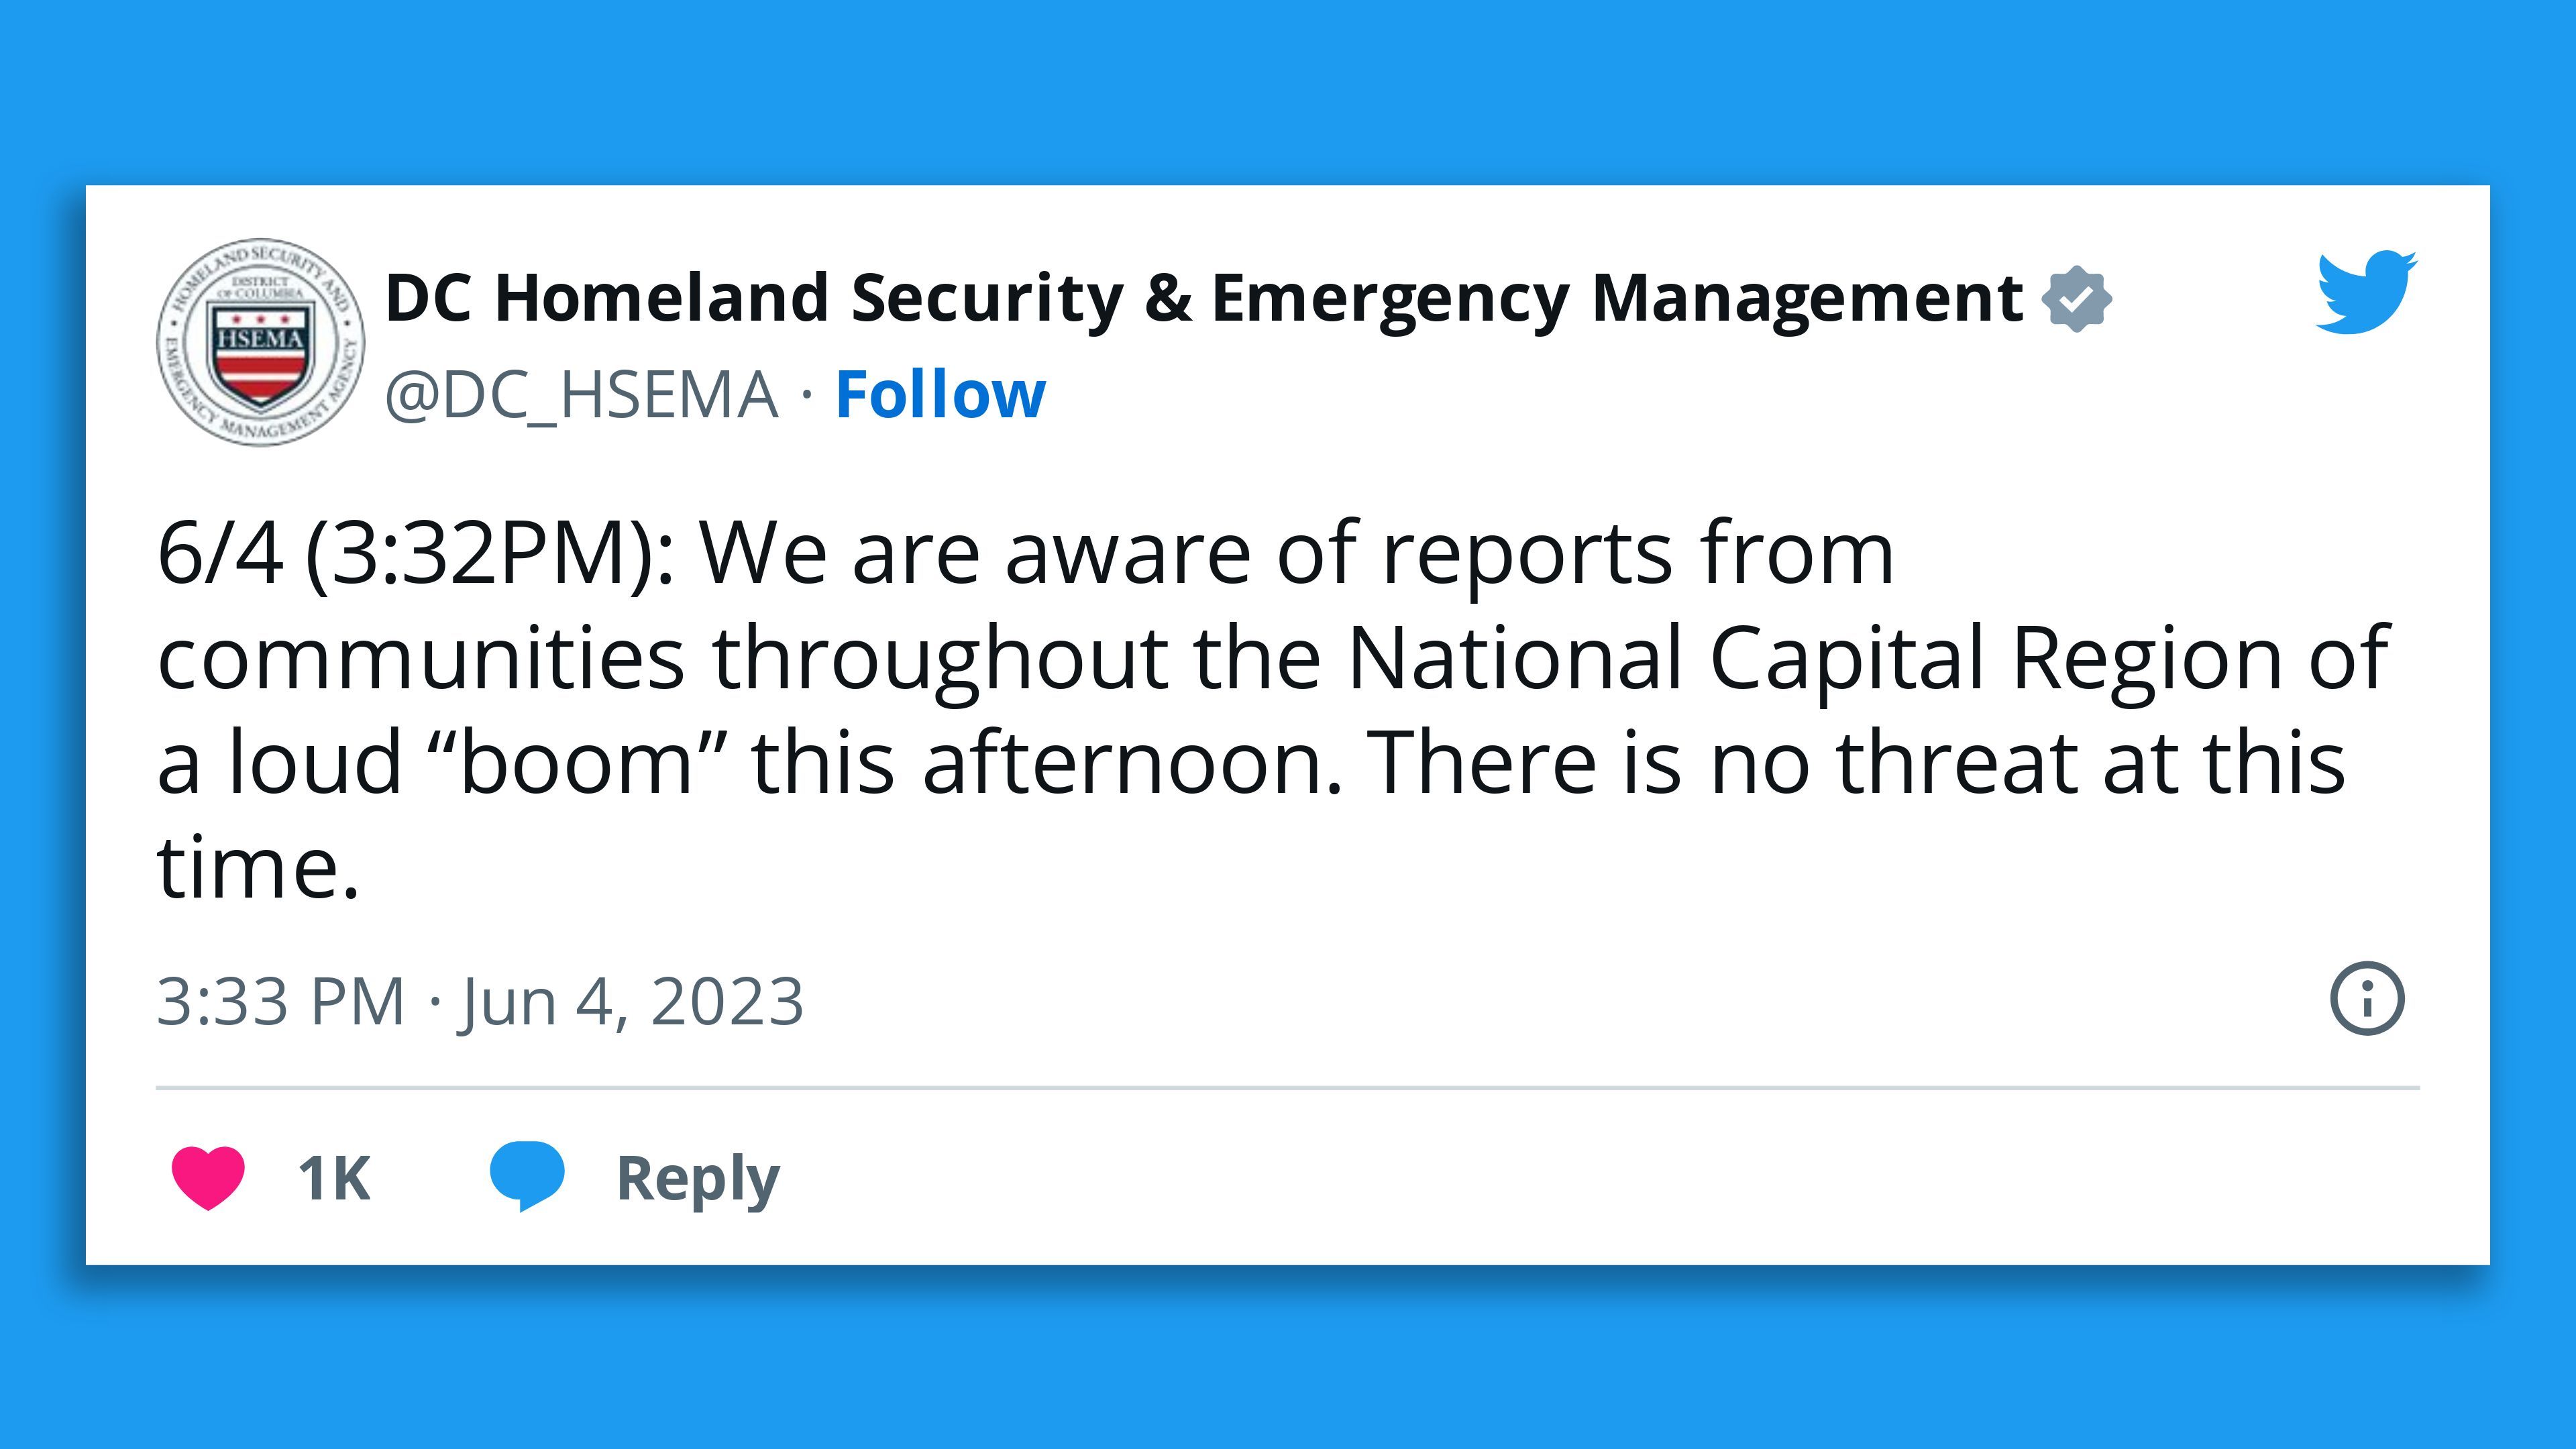 A screenshot of a tweet by D.C. Emergency Management saying: "We are aware of reports from communities throughout the National Capital Region of a loud “boom” this afternoon. There is no threat at this time."